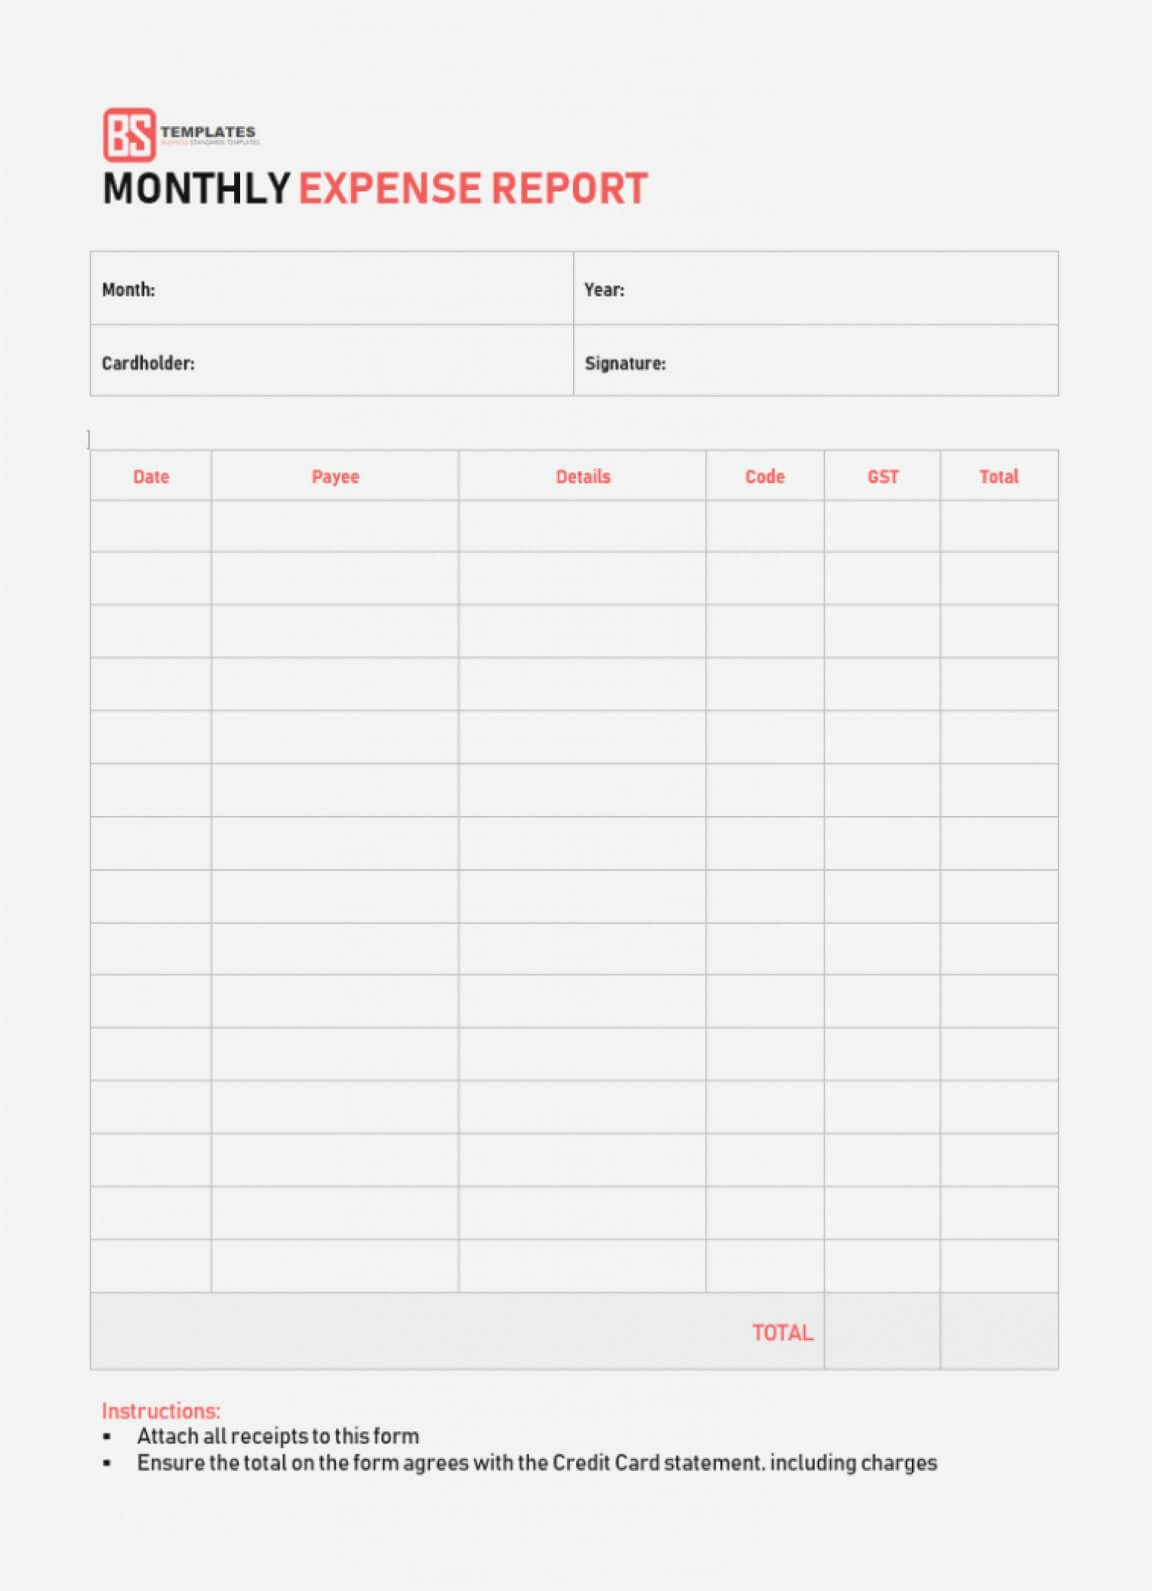 Expense Report Spreadsheet Template Xls For Mac Numbers Throughout Expense Report Template Excel 2010